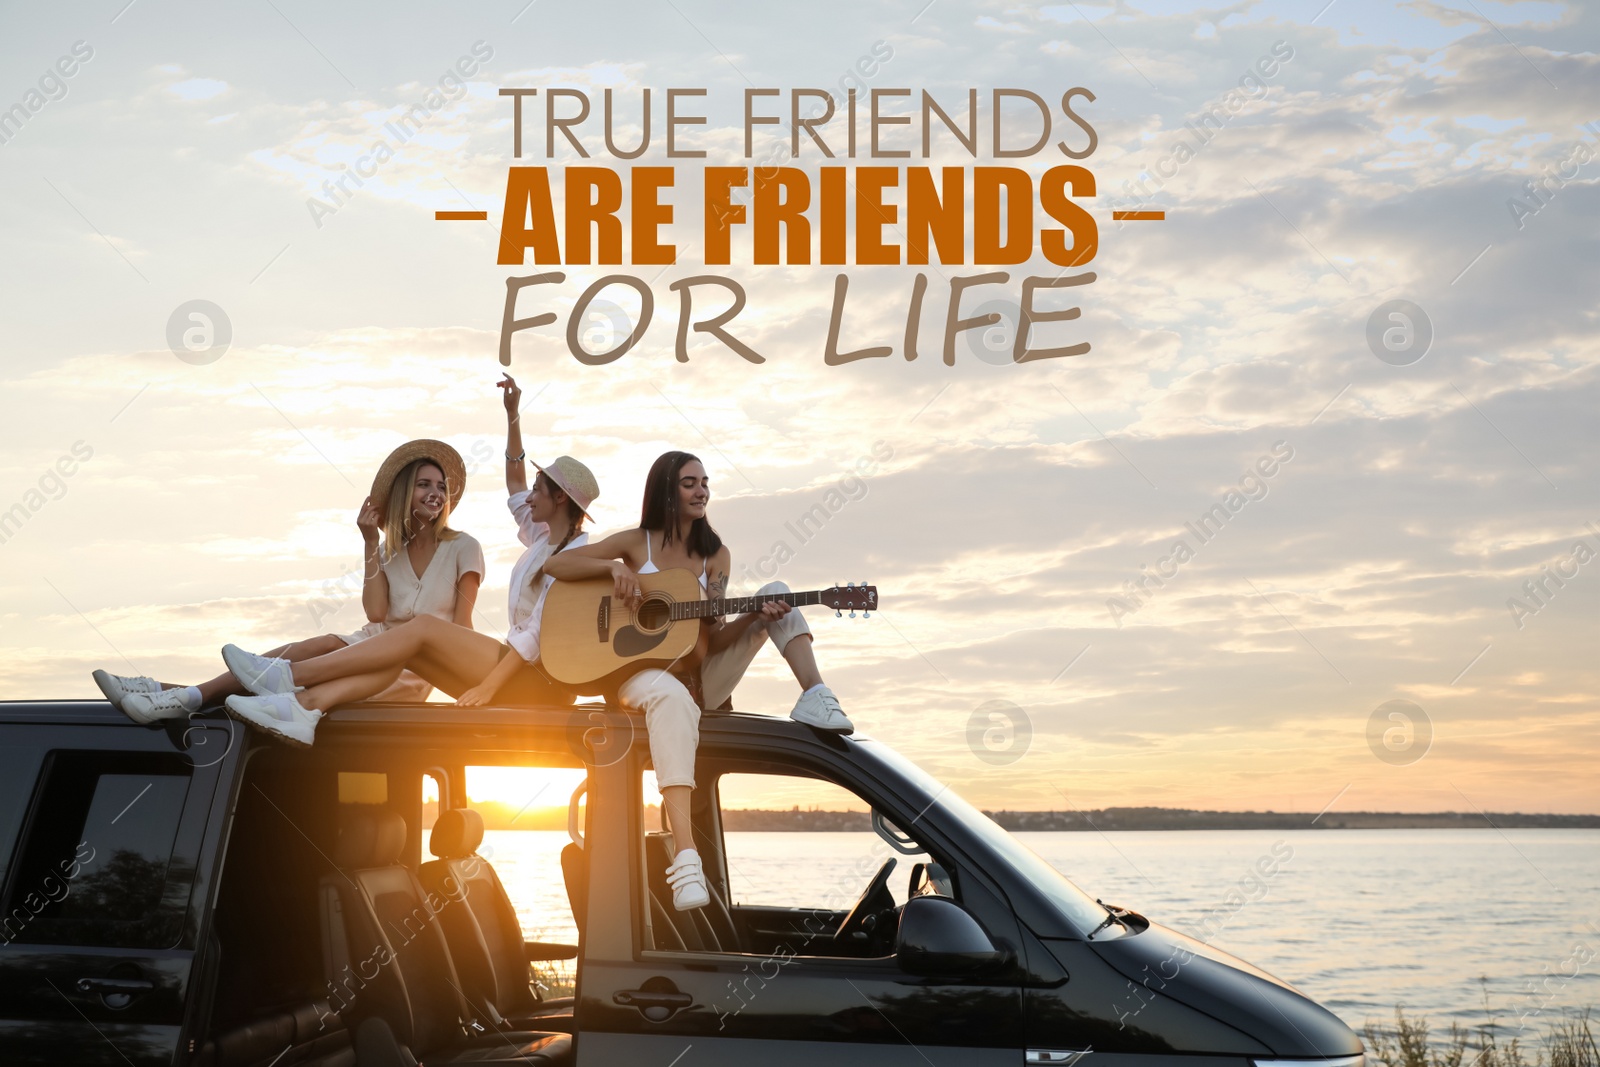 Image of True Friends Are Friends For Life. Inspirational quote saying that truly friendship lasts for years. Text against view of girls having fun on car roof at sunset